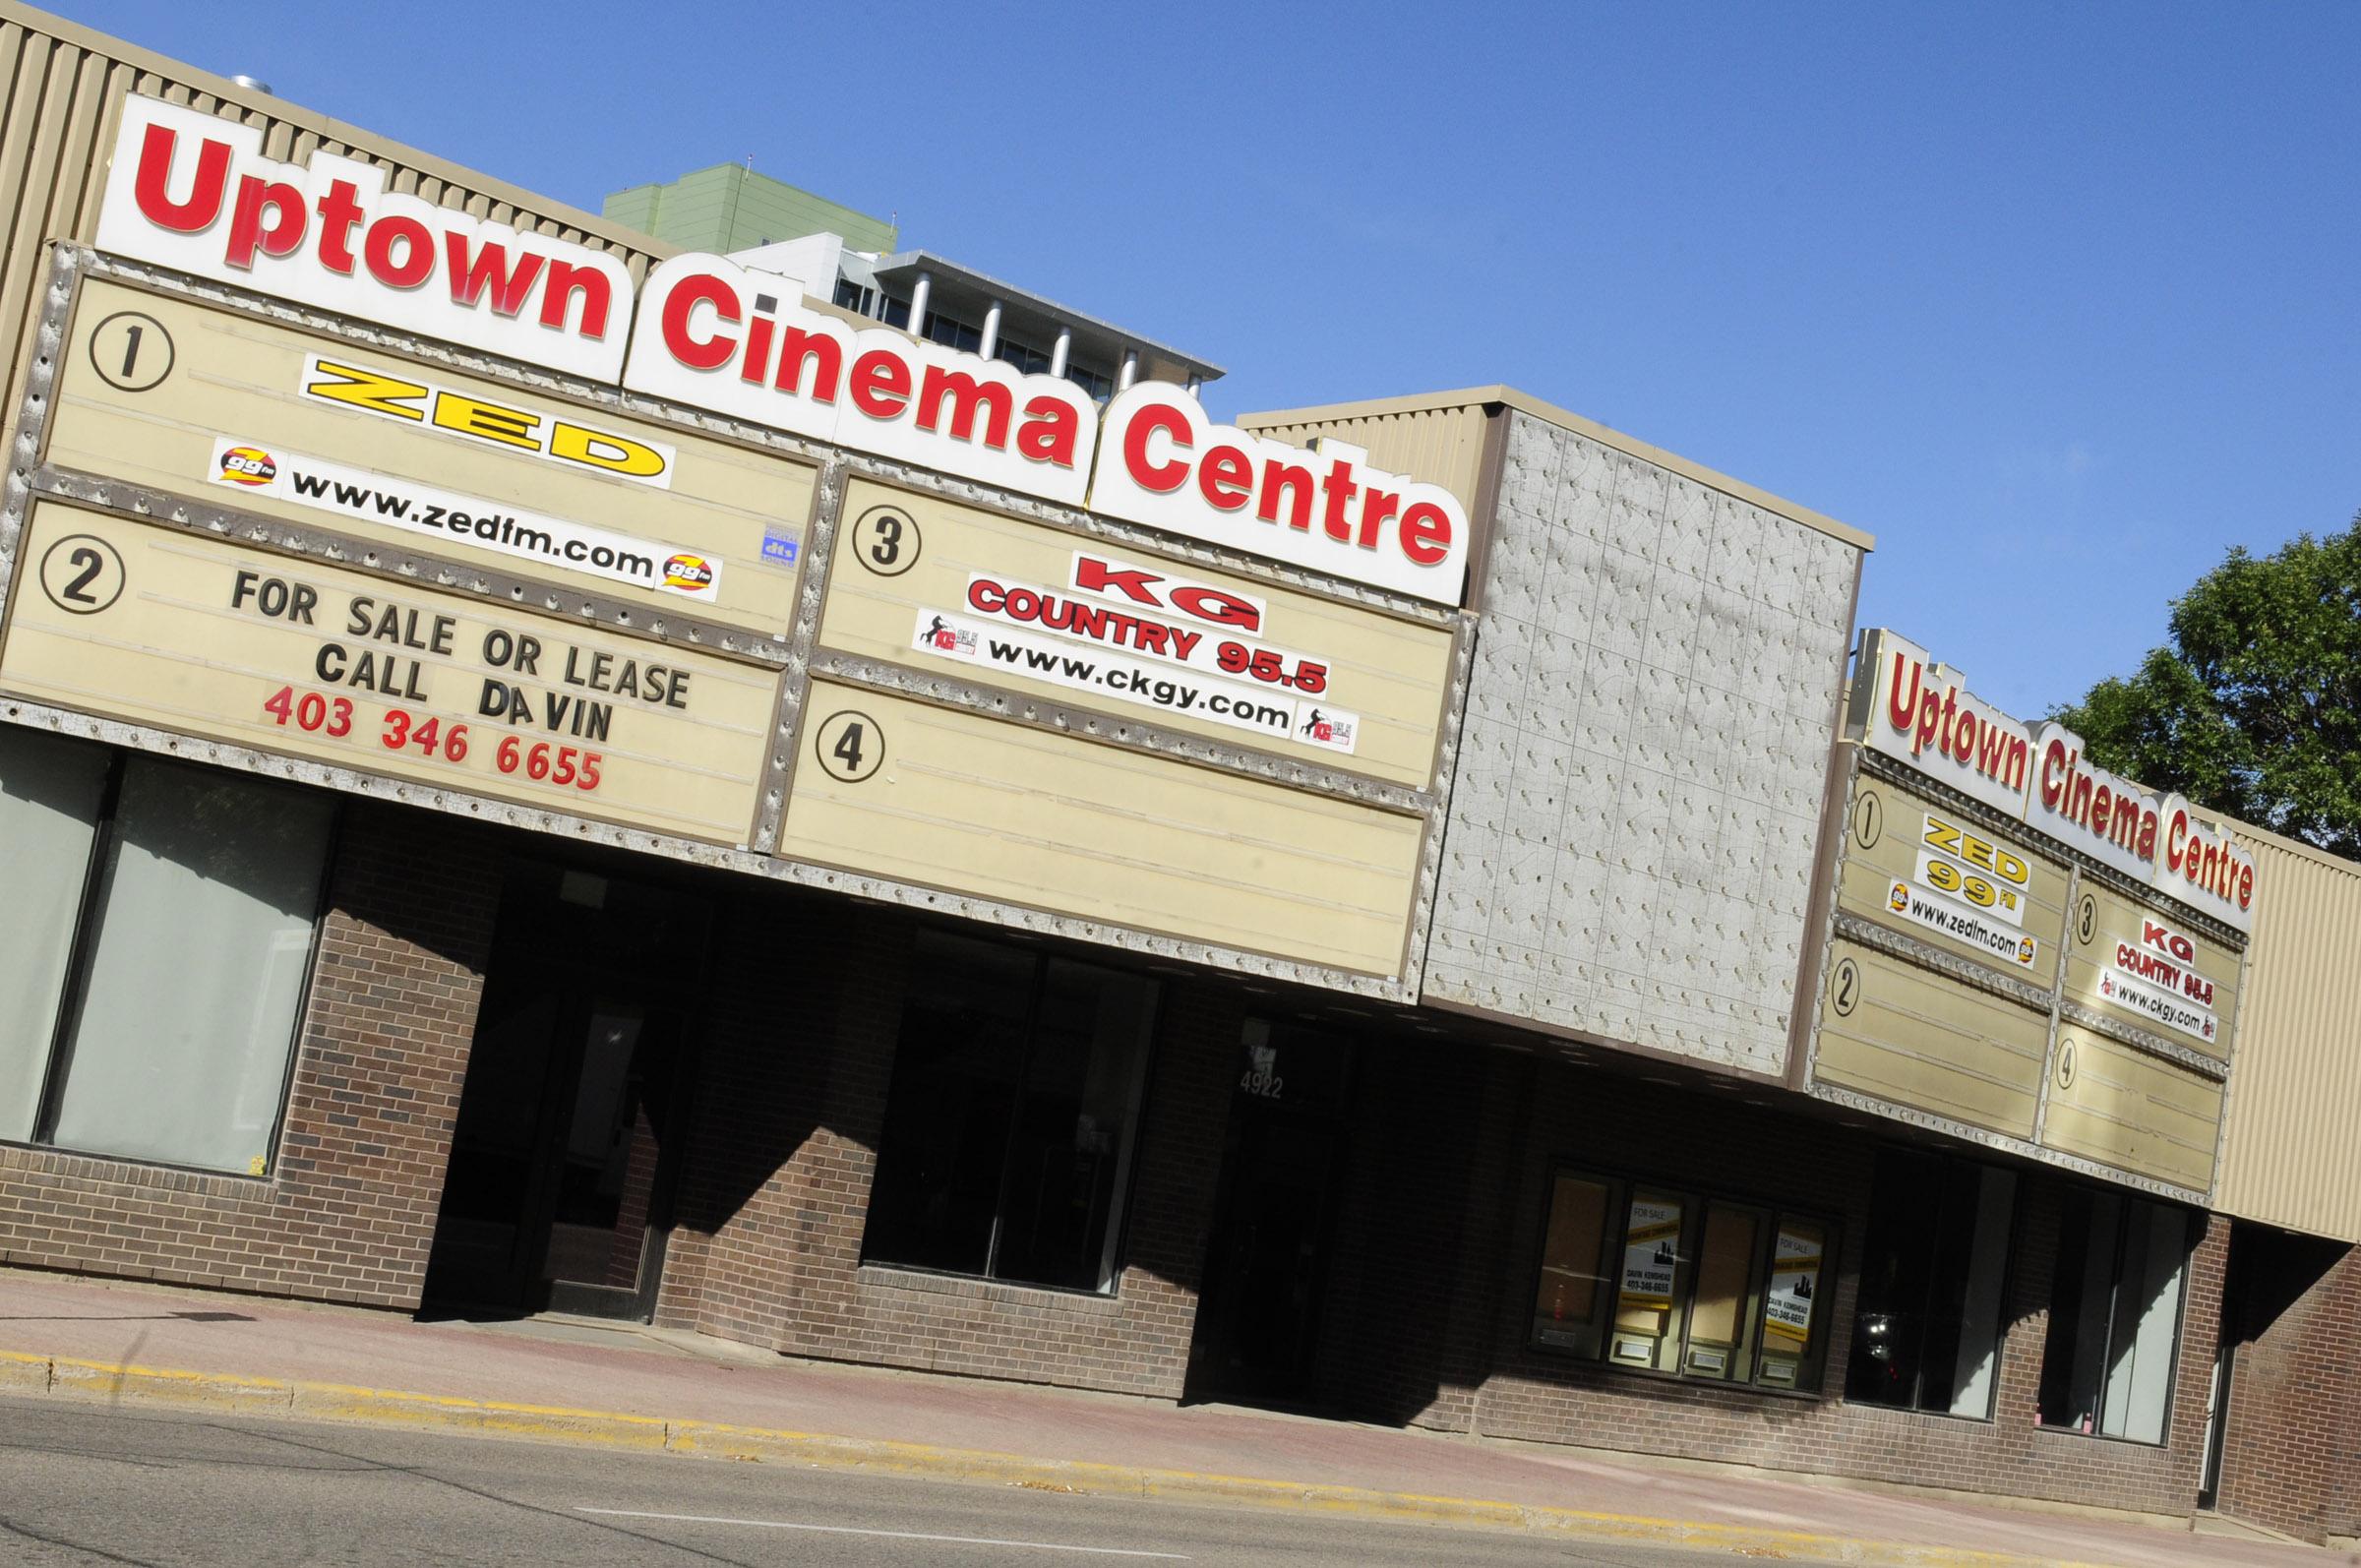 The membership of CAT has given the go ahead for their board to acquire the old Uptown Cinema Centre in Red Deer